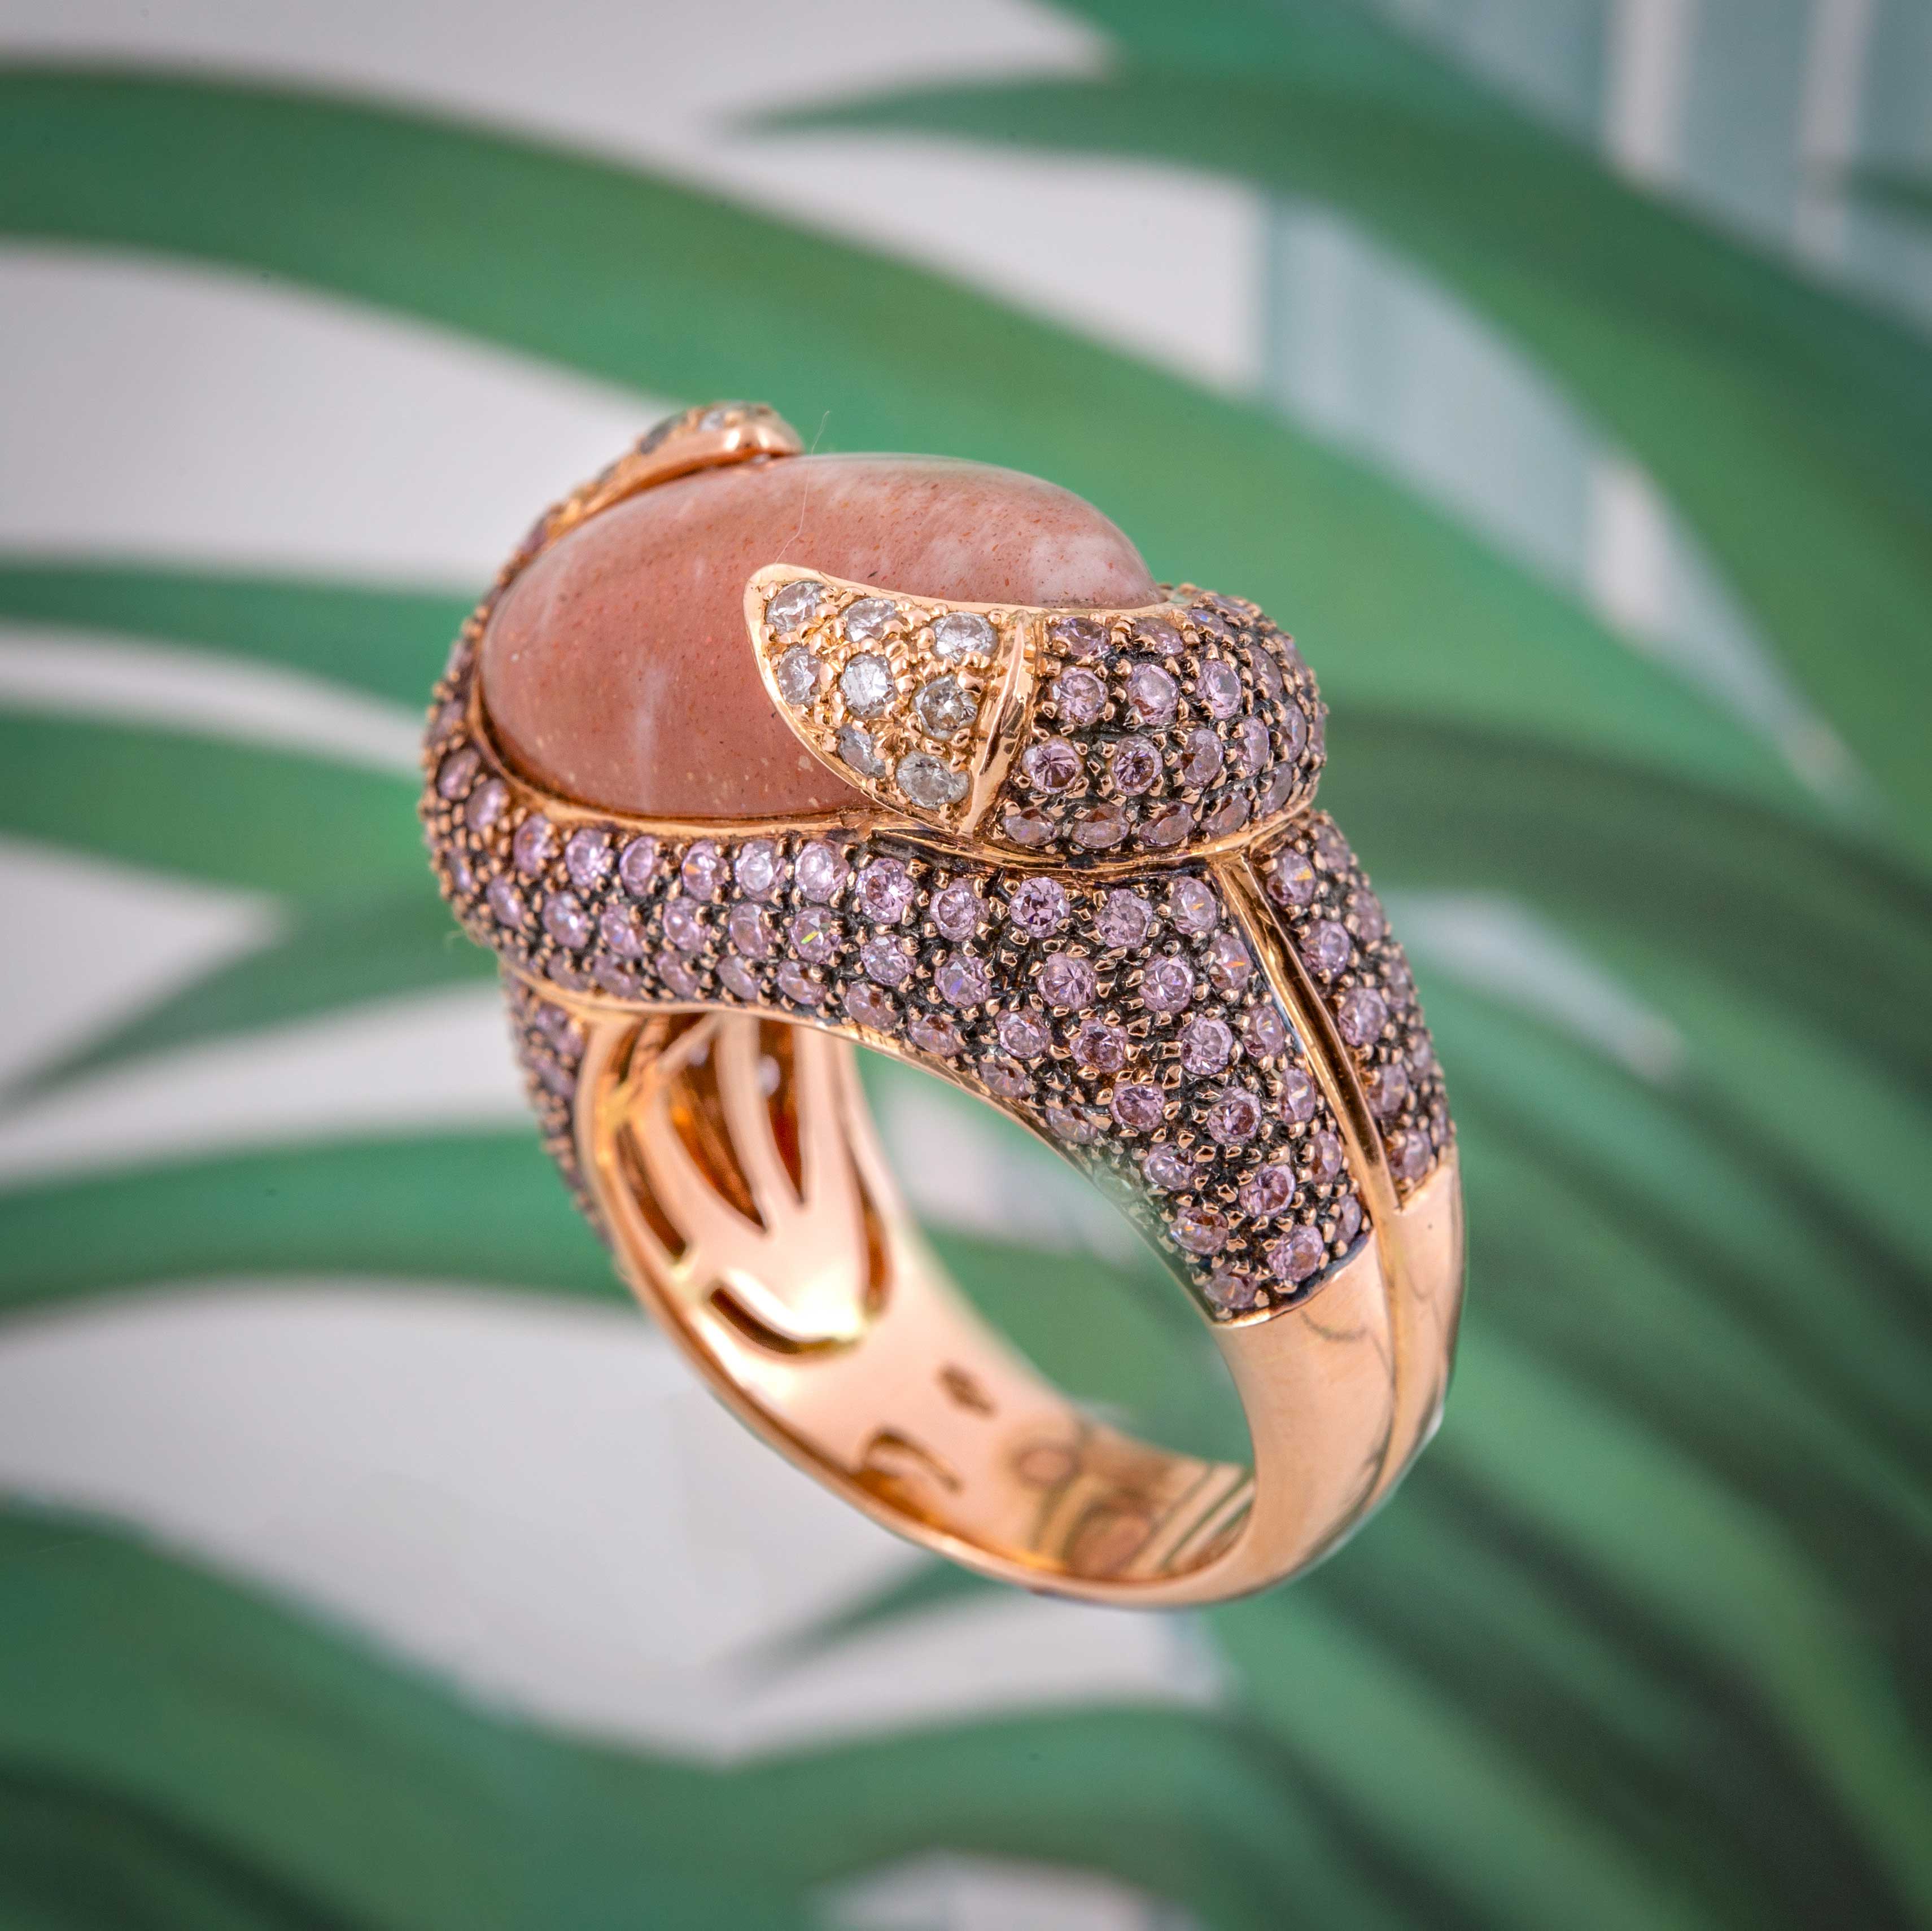 Diamonds, Gemstones, Gold & More: The Jewellery Collection